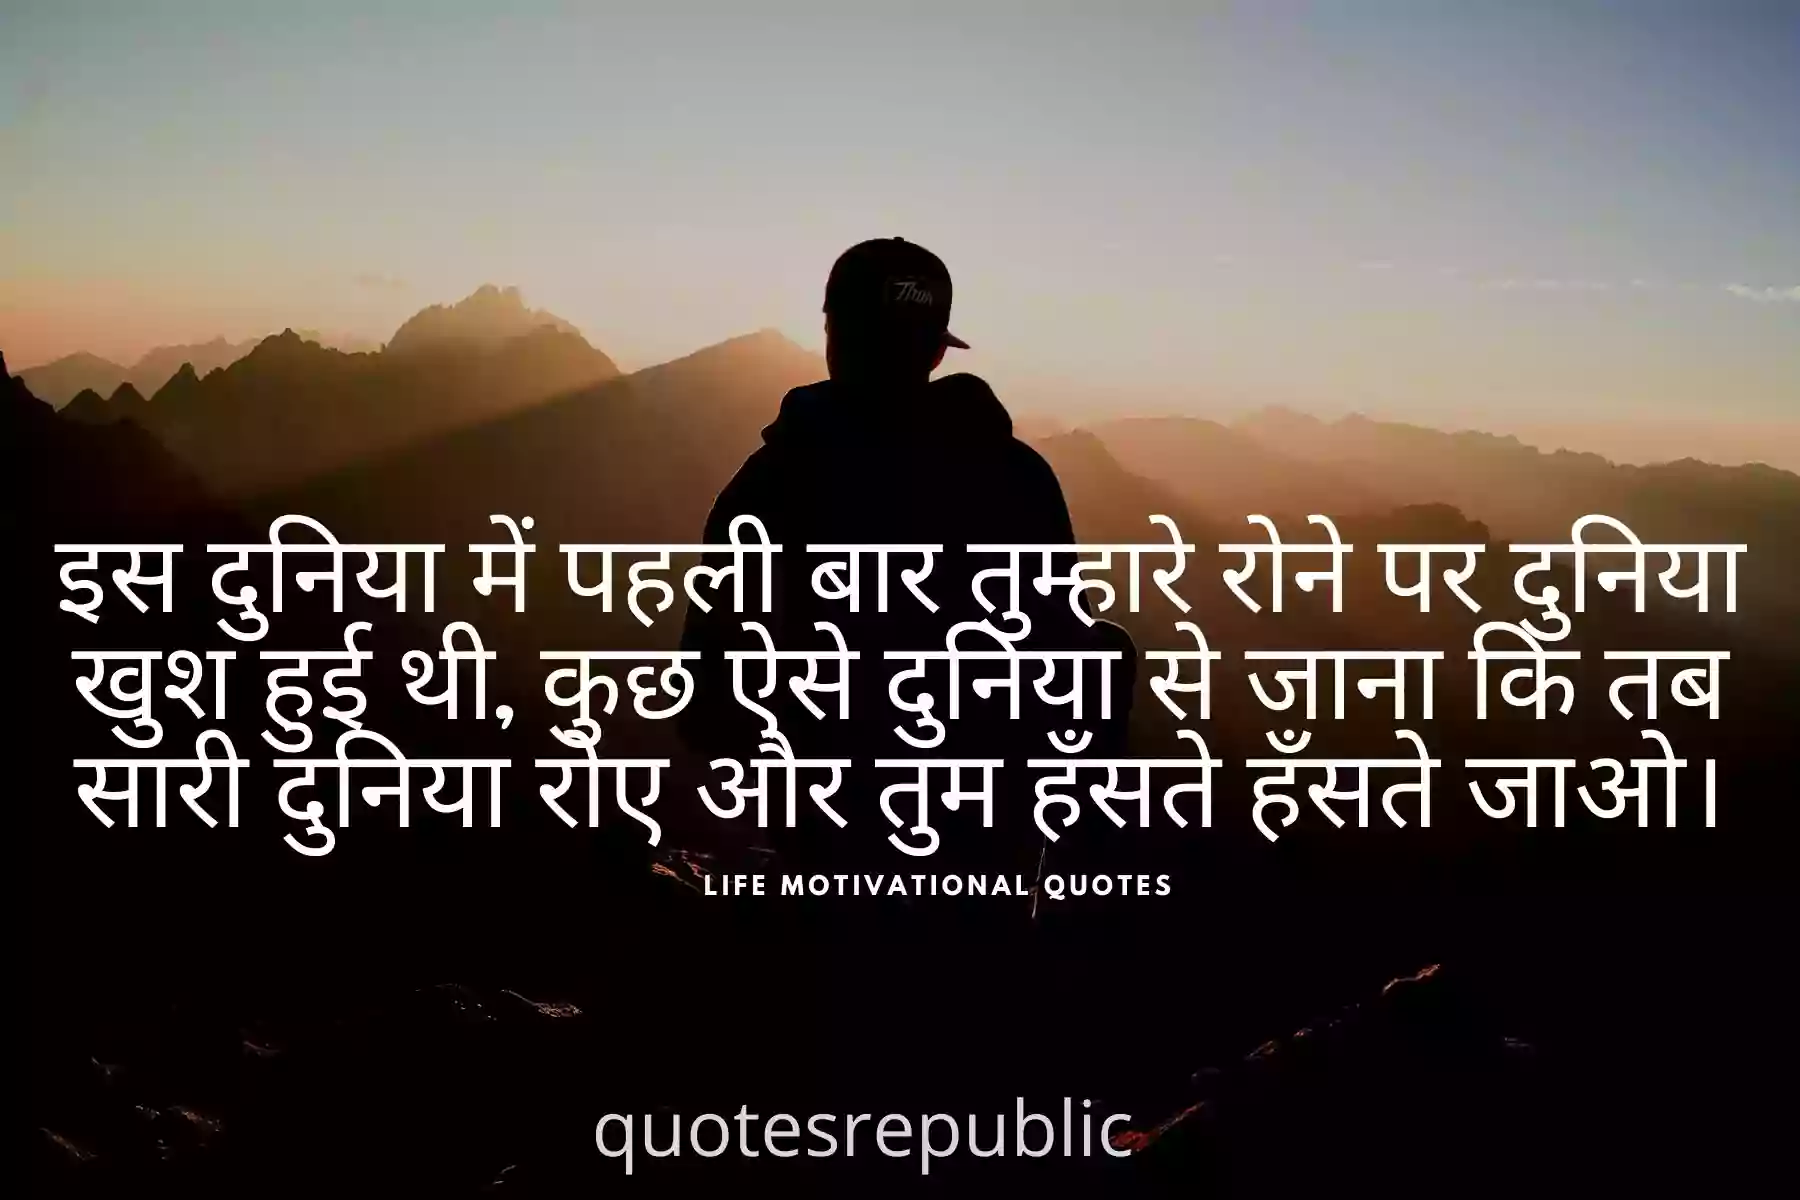 Motivational Quotes On Life In Hindi